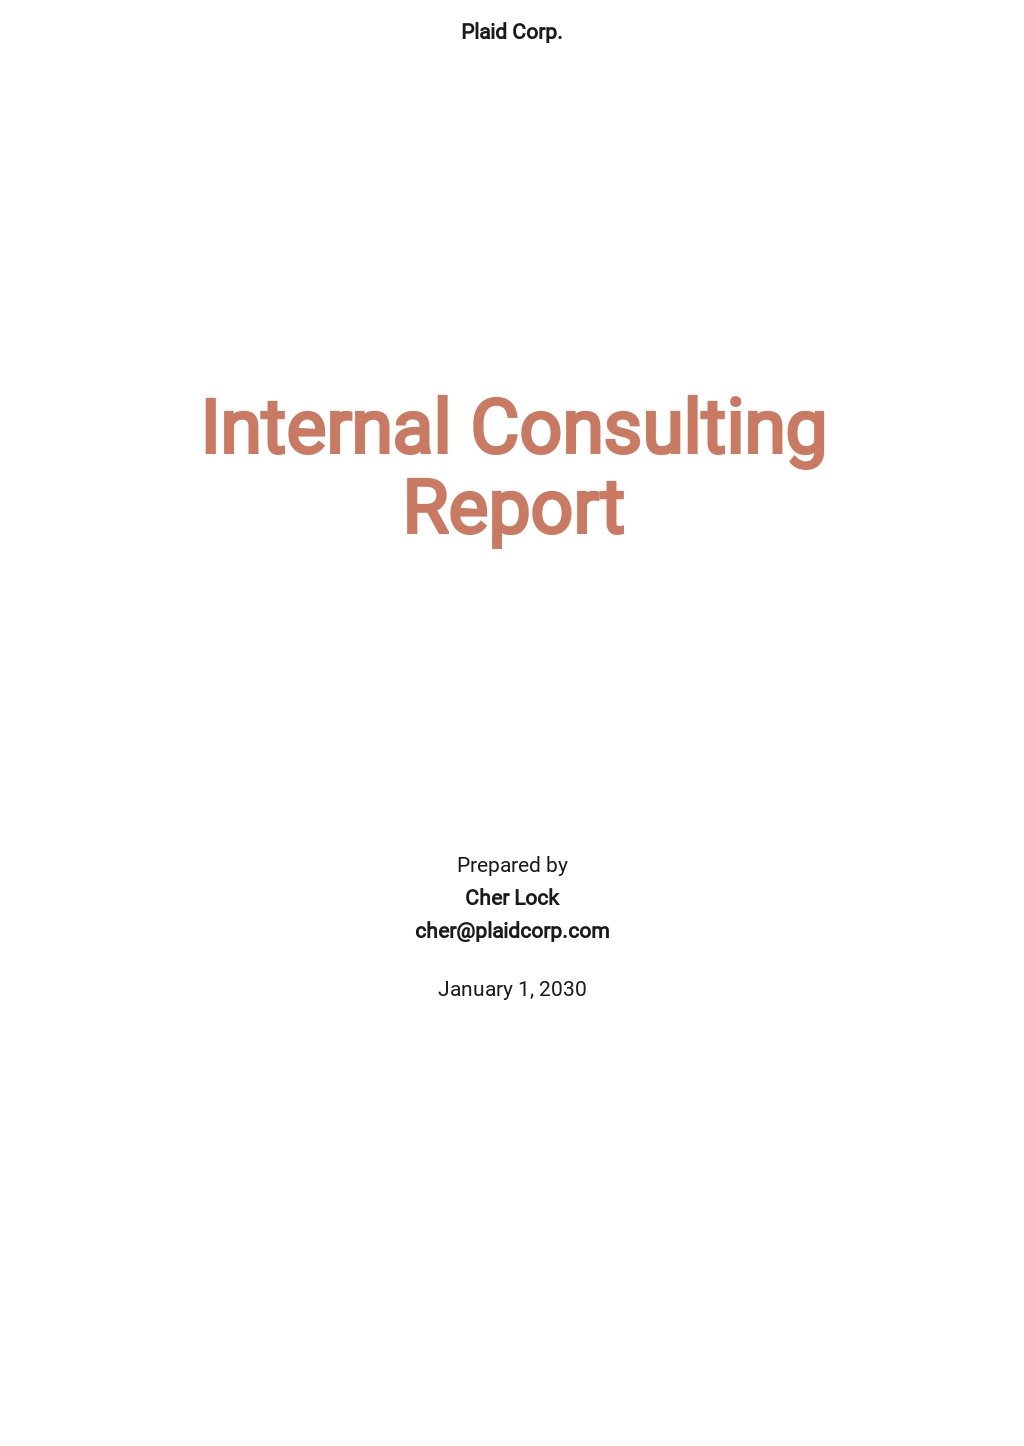 Internal Consulting Report Template.jpe